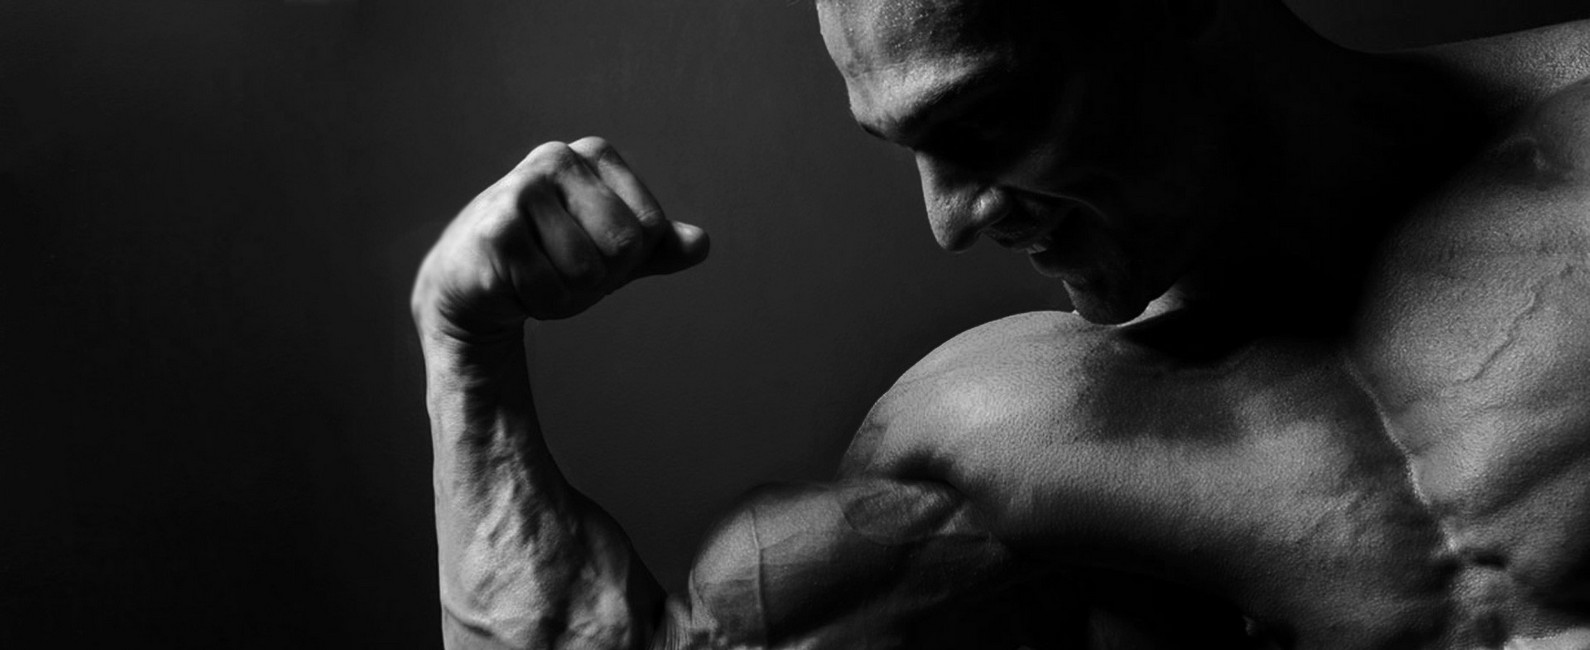 Buy legal anabolic steroids uk